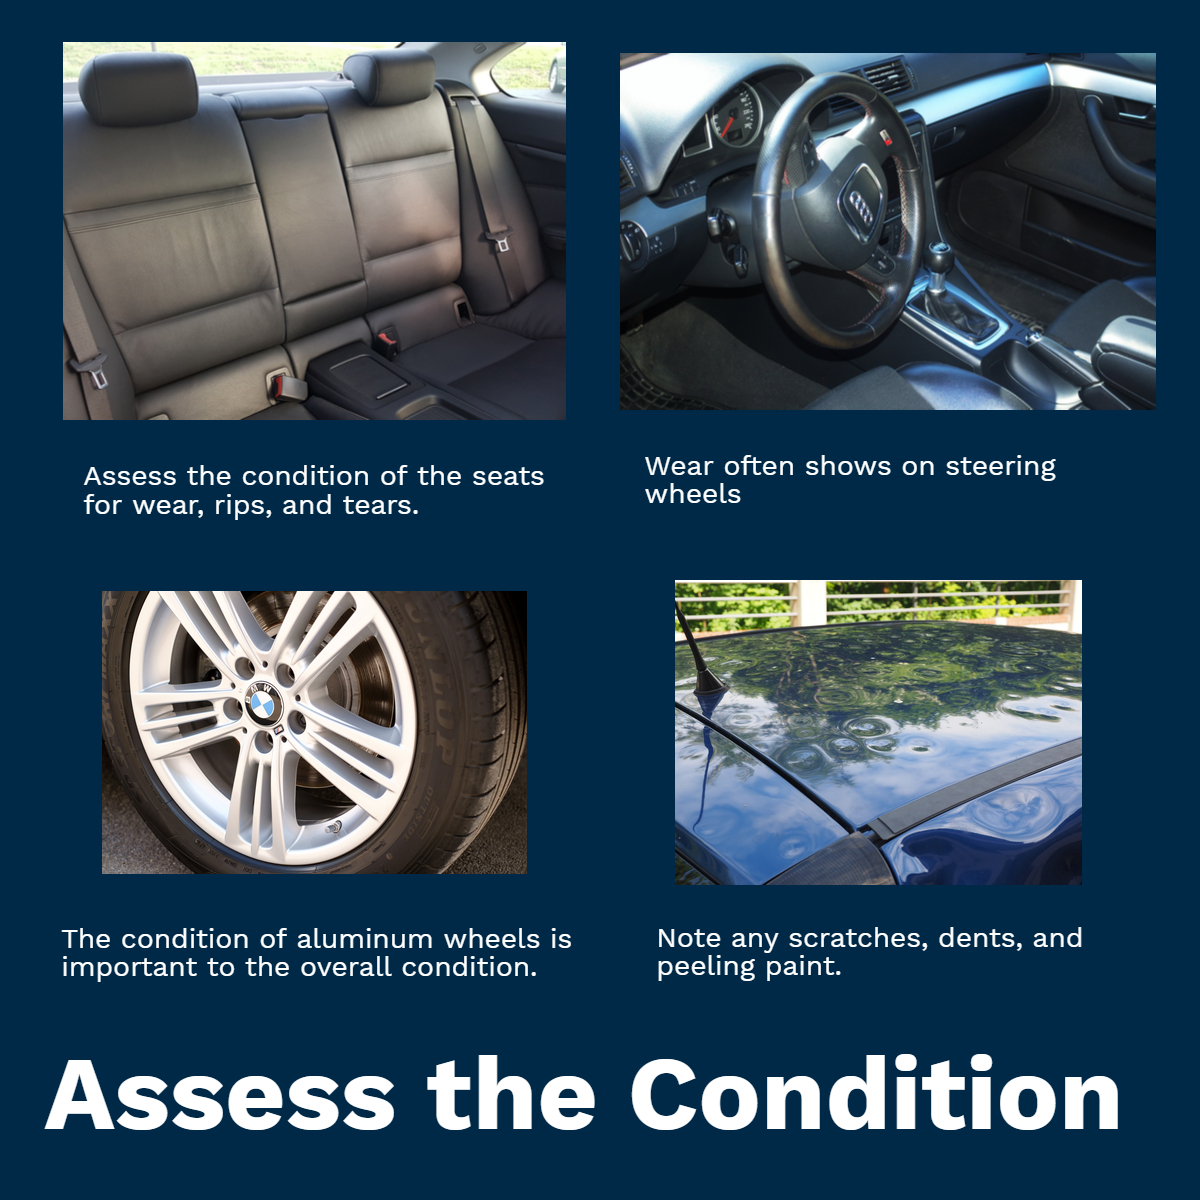 How to Assess vehicle condition - Look for wear on the steering wheel, seats, wheels, and exterior paint. 